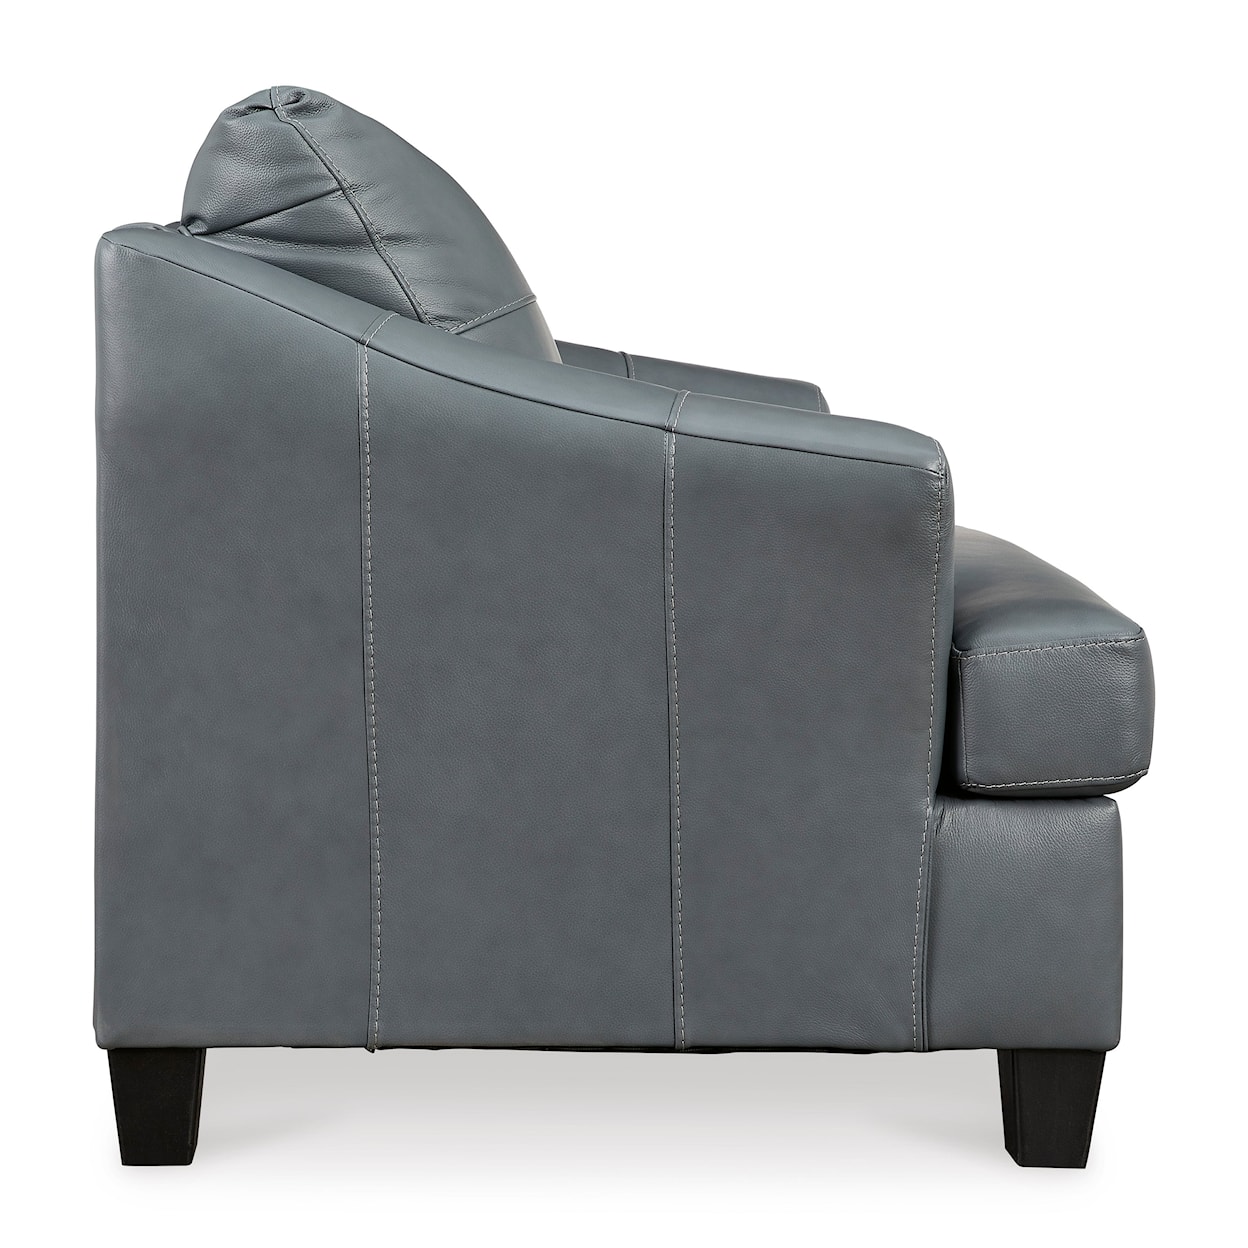 Signature Design by Ashley Furniture Genoa Oversized Chair